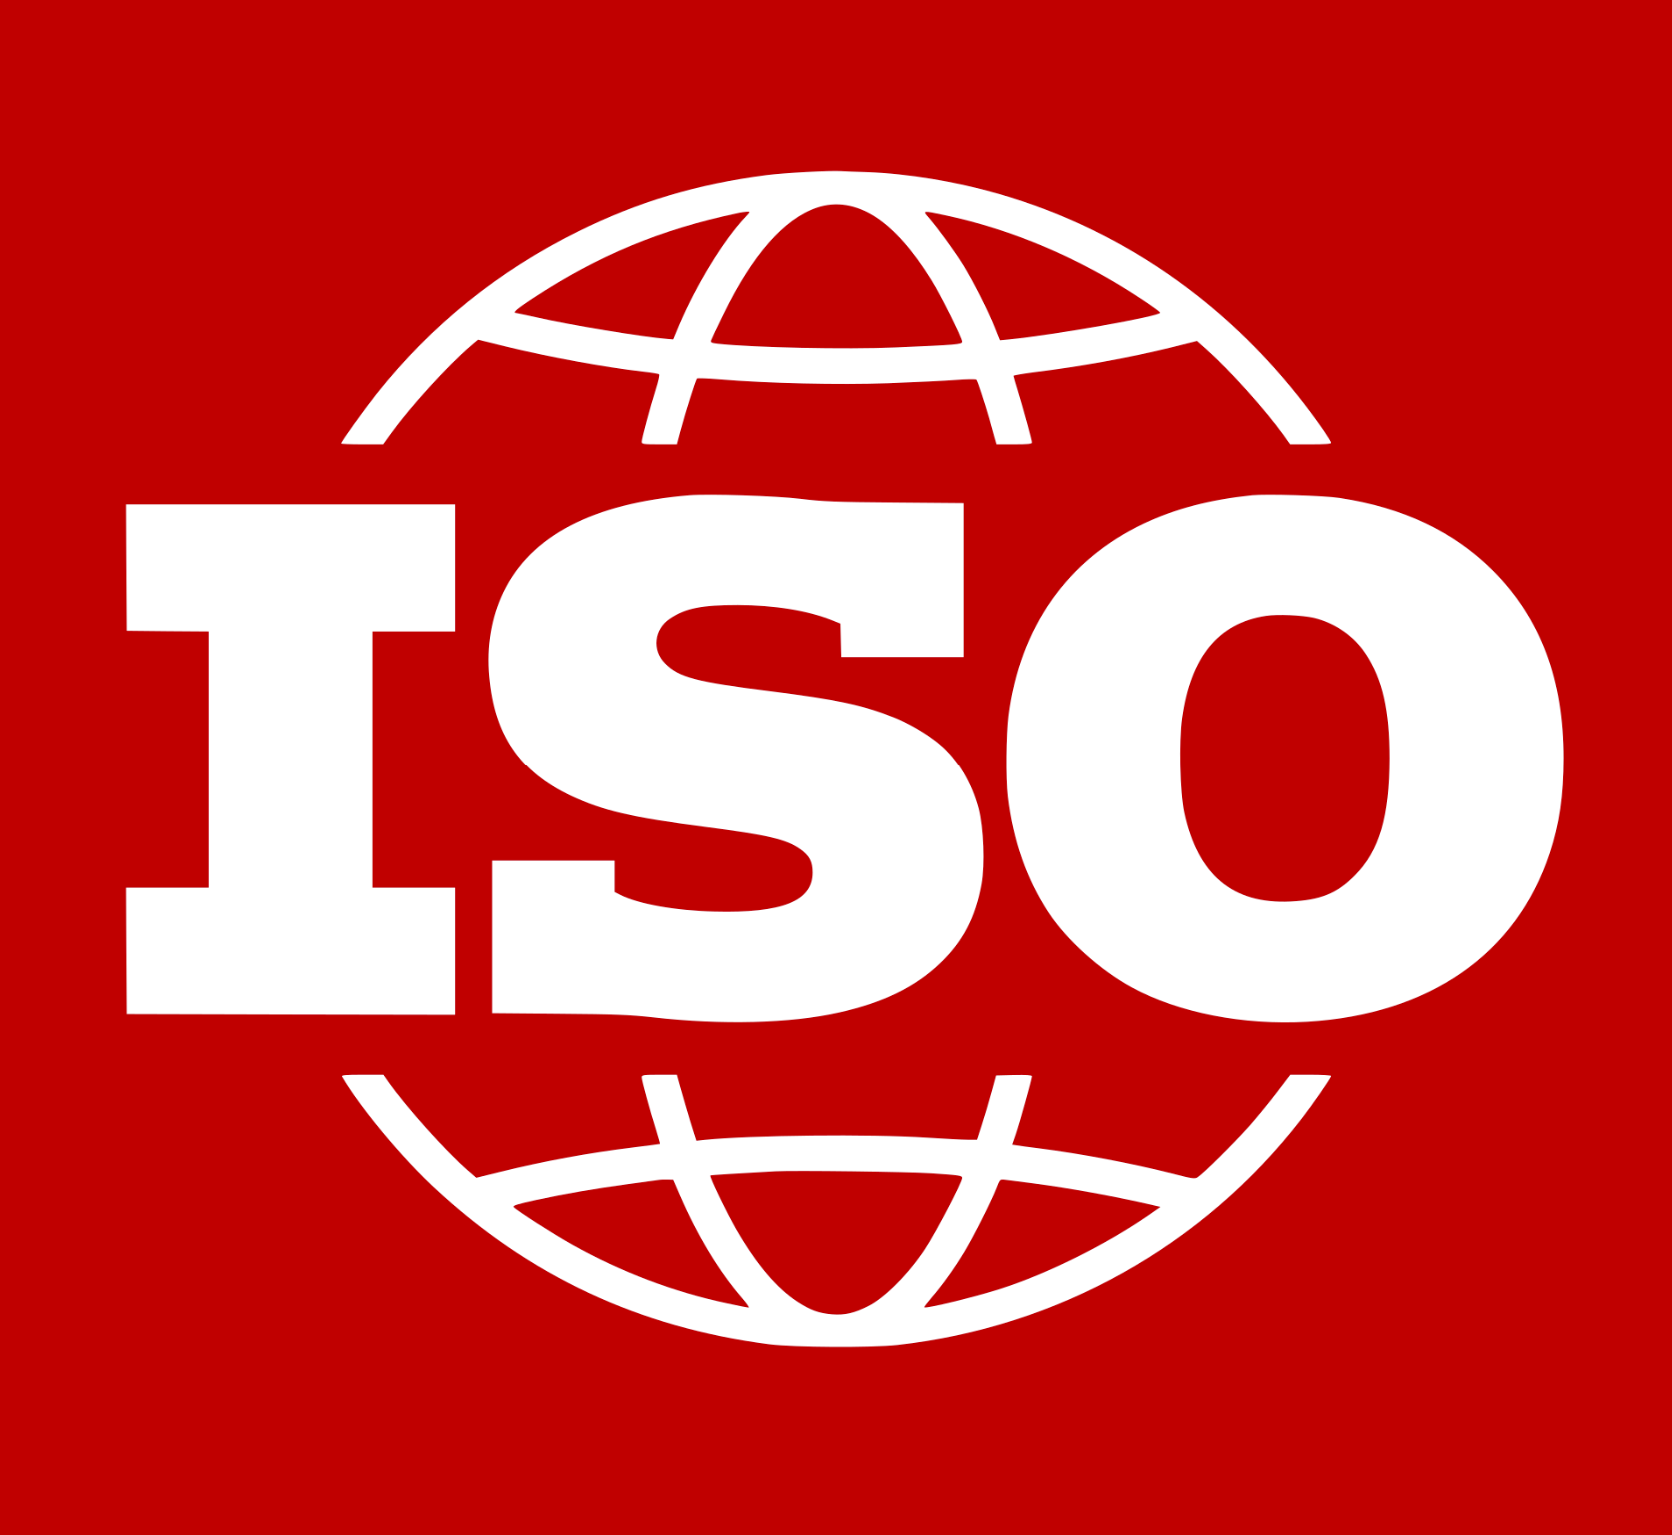 Port Arthur Joins Other Monument Plants in Achieving ISO 9001 Status in Record Time